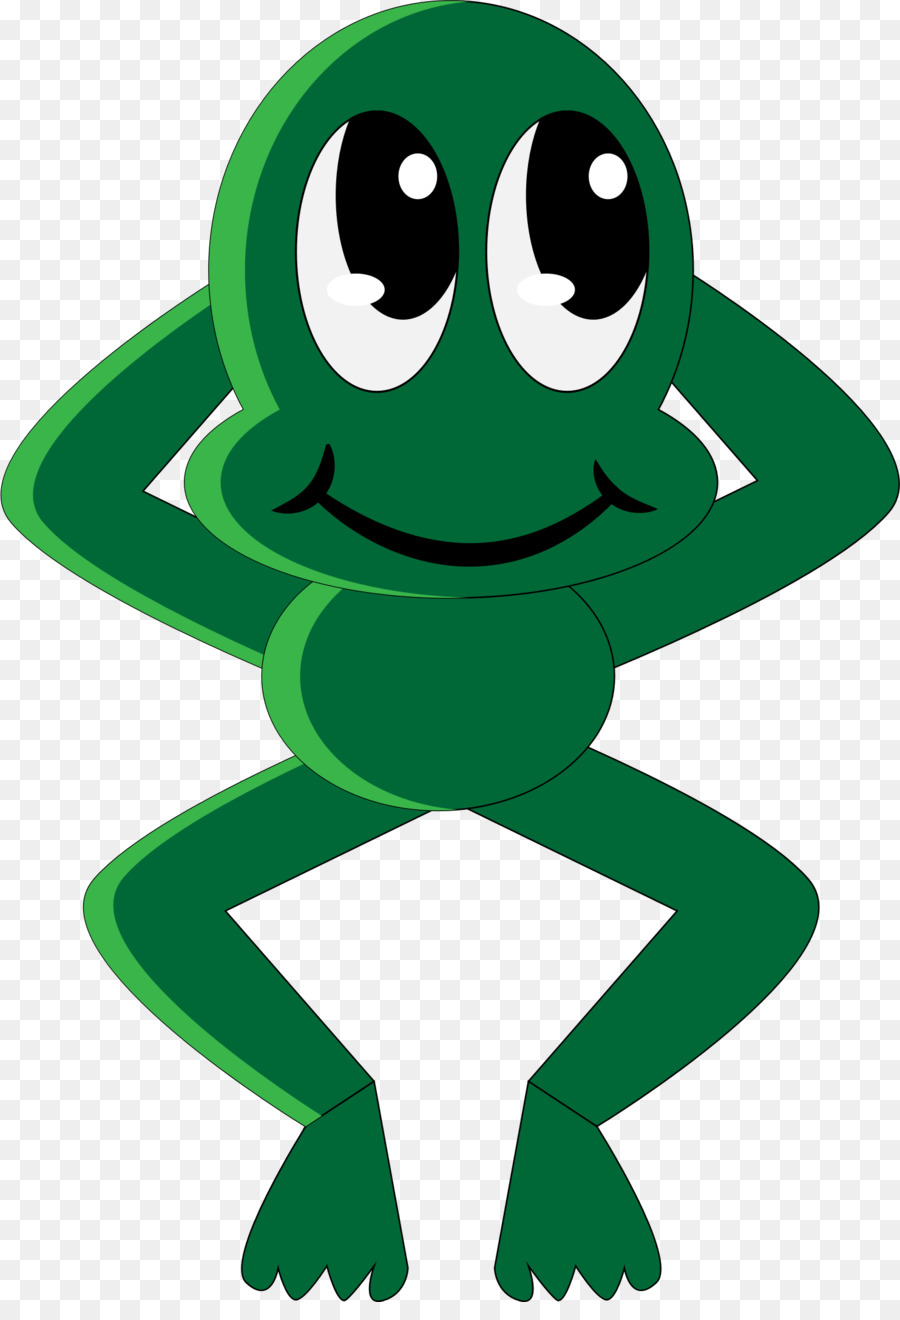 Pepe The Frog clipart